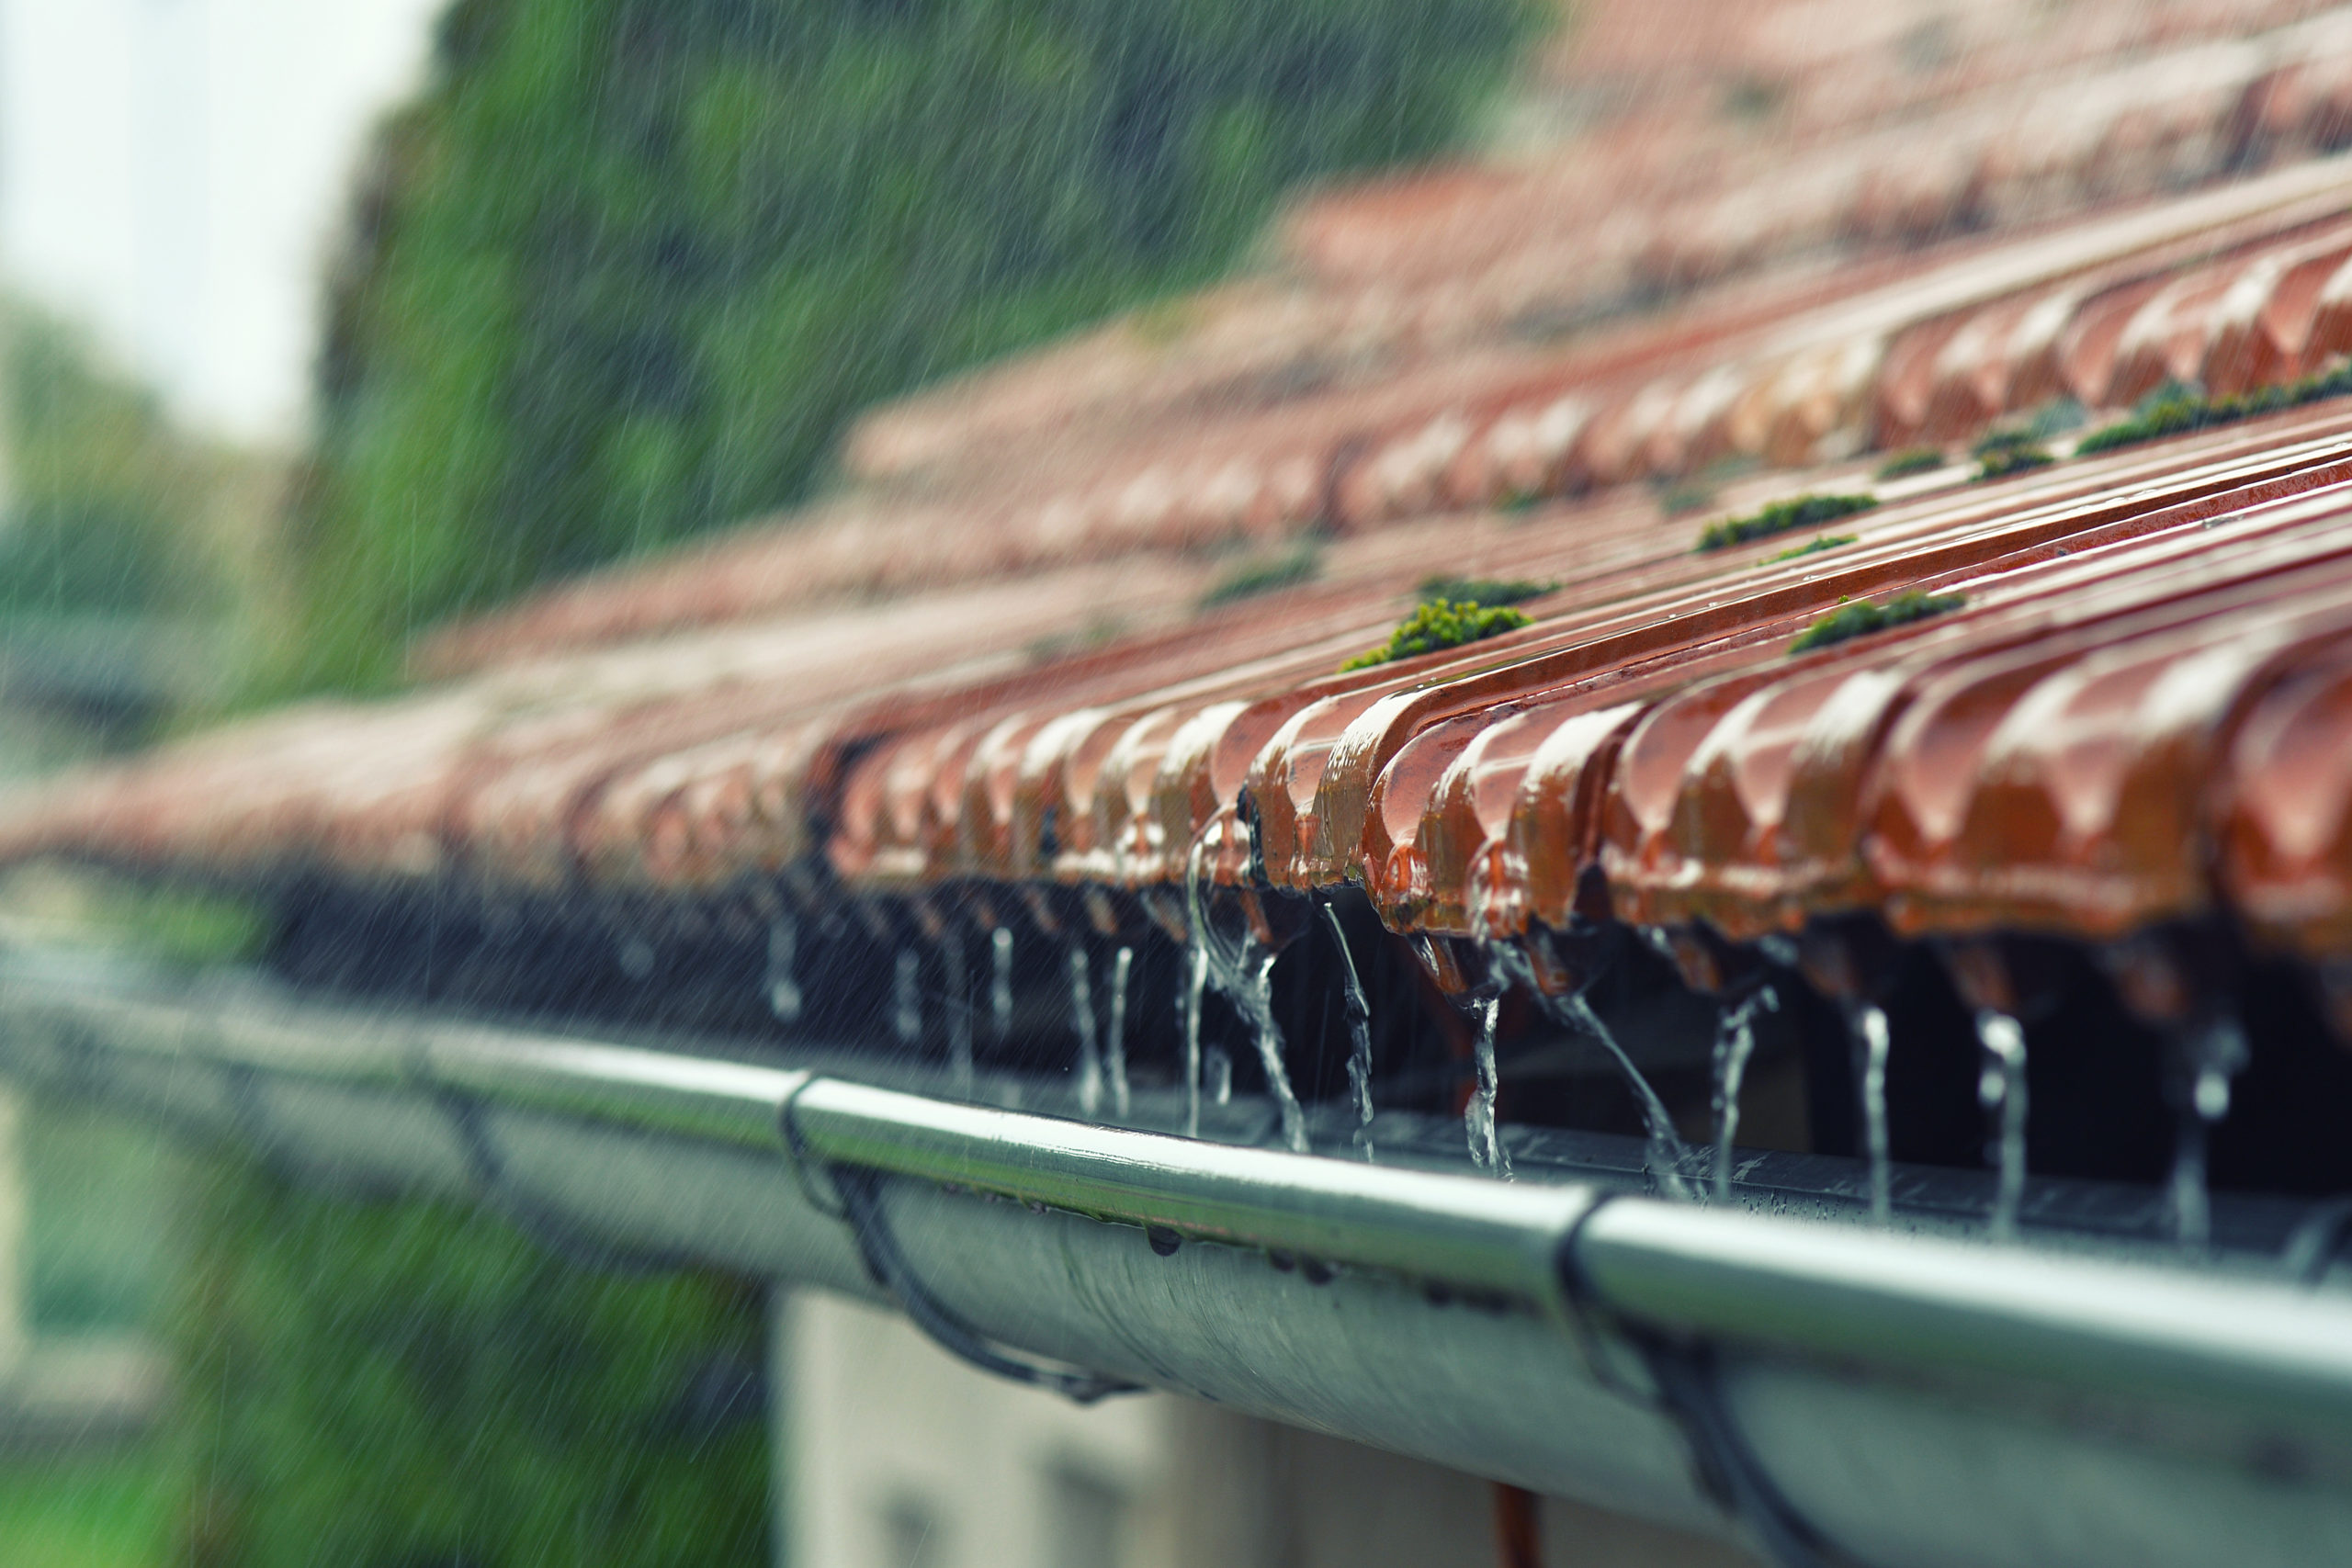 Drops of water flow into the eaves on the house in the rain.